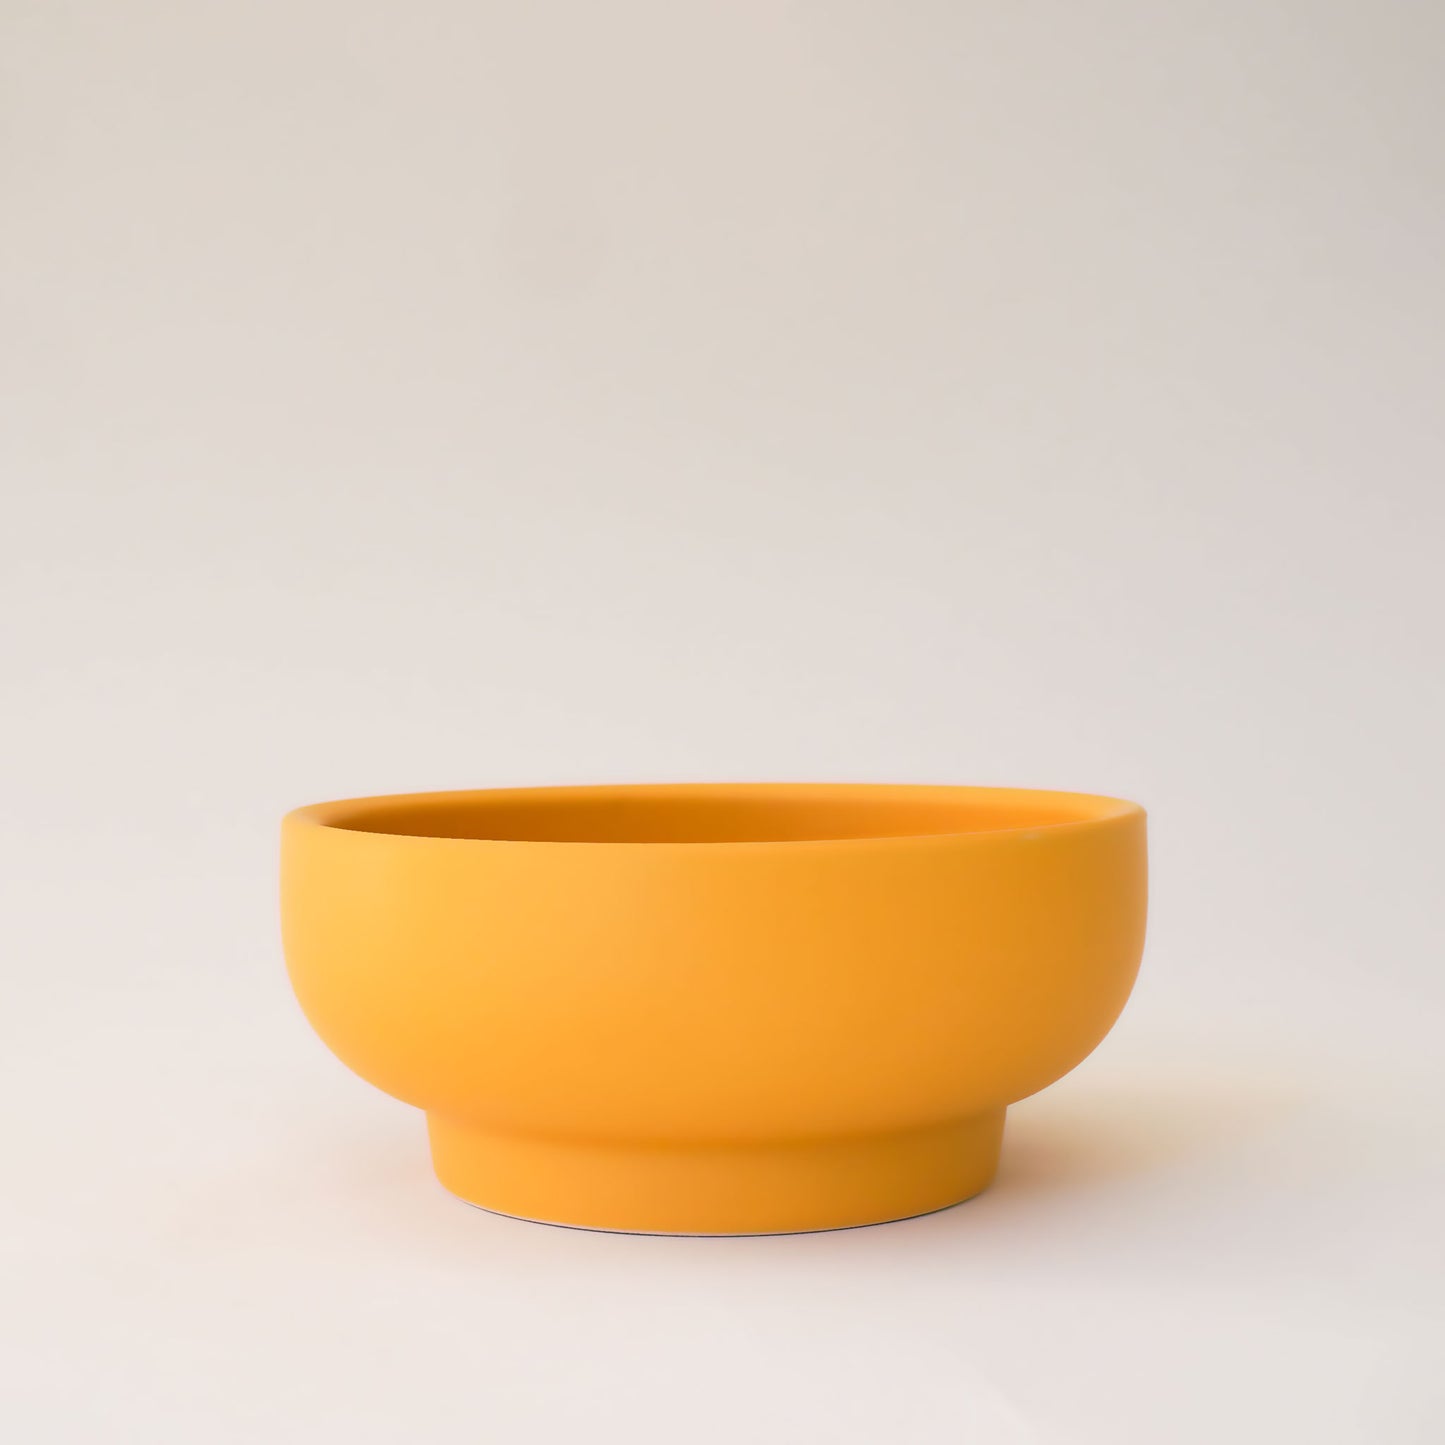 Bright orange bowl planter that tapers towards the base.